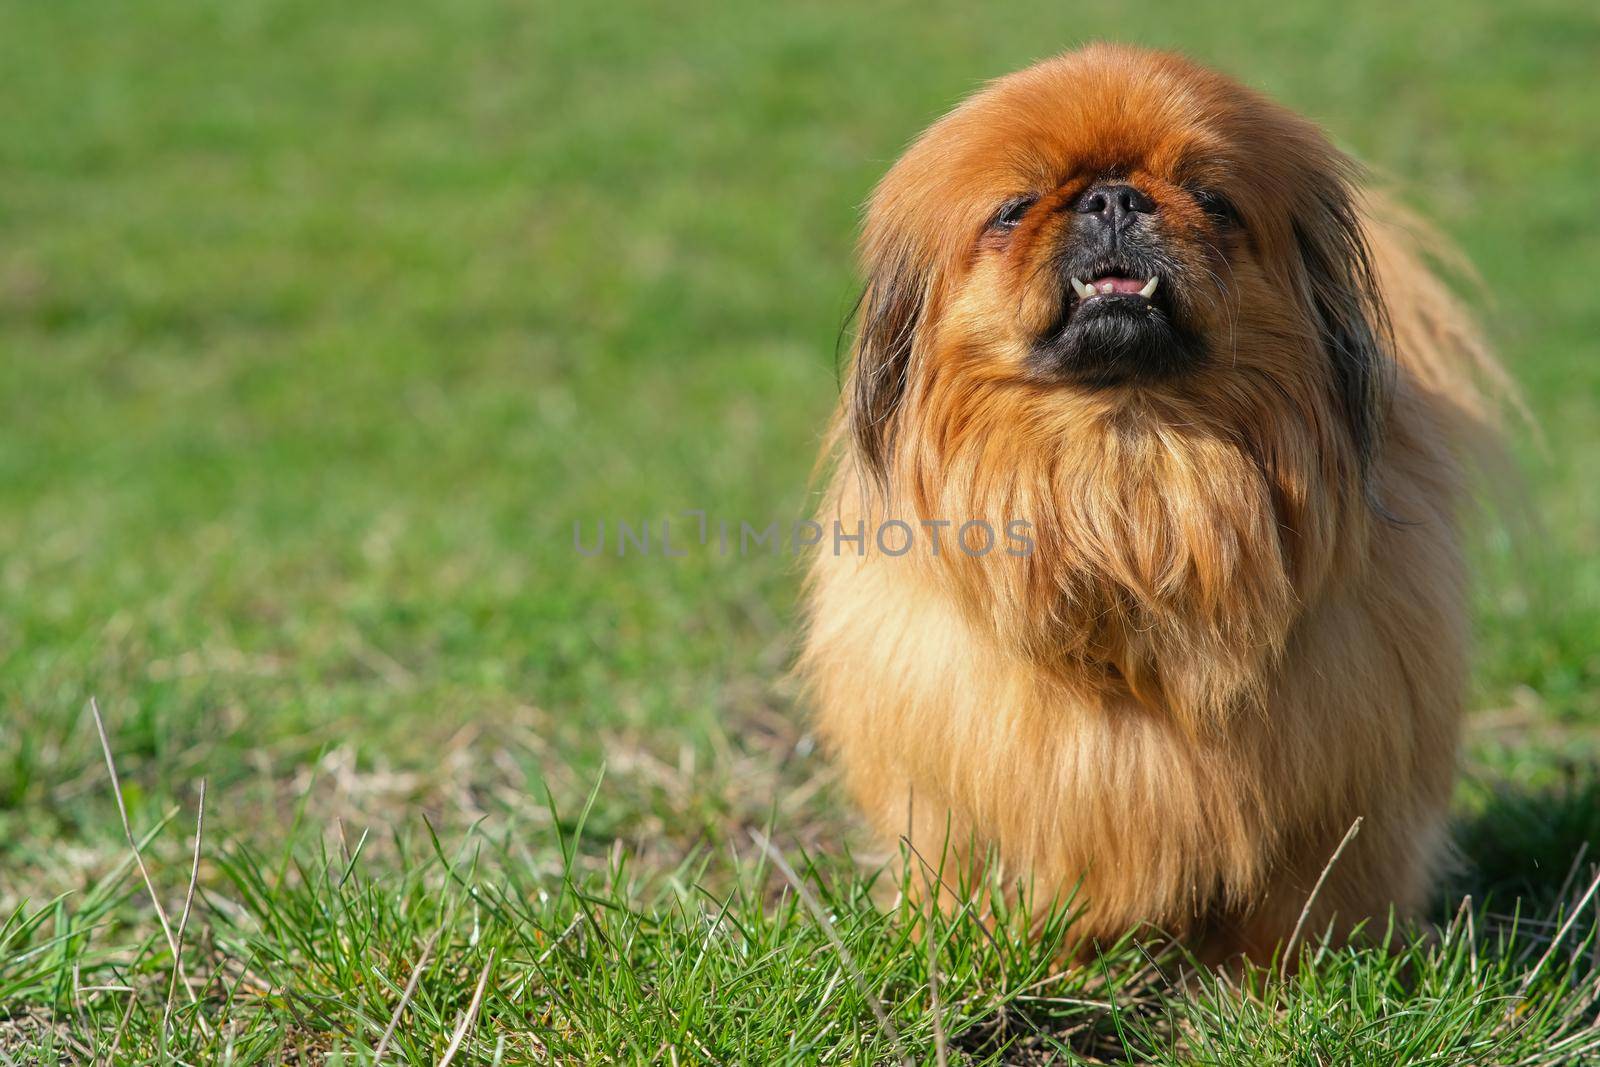 Dog breed Pekingese on a green grass. Shaggy elderly Pekingese red color. by N_Design